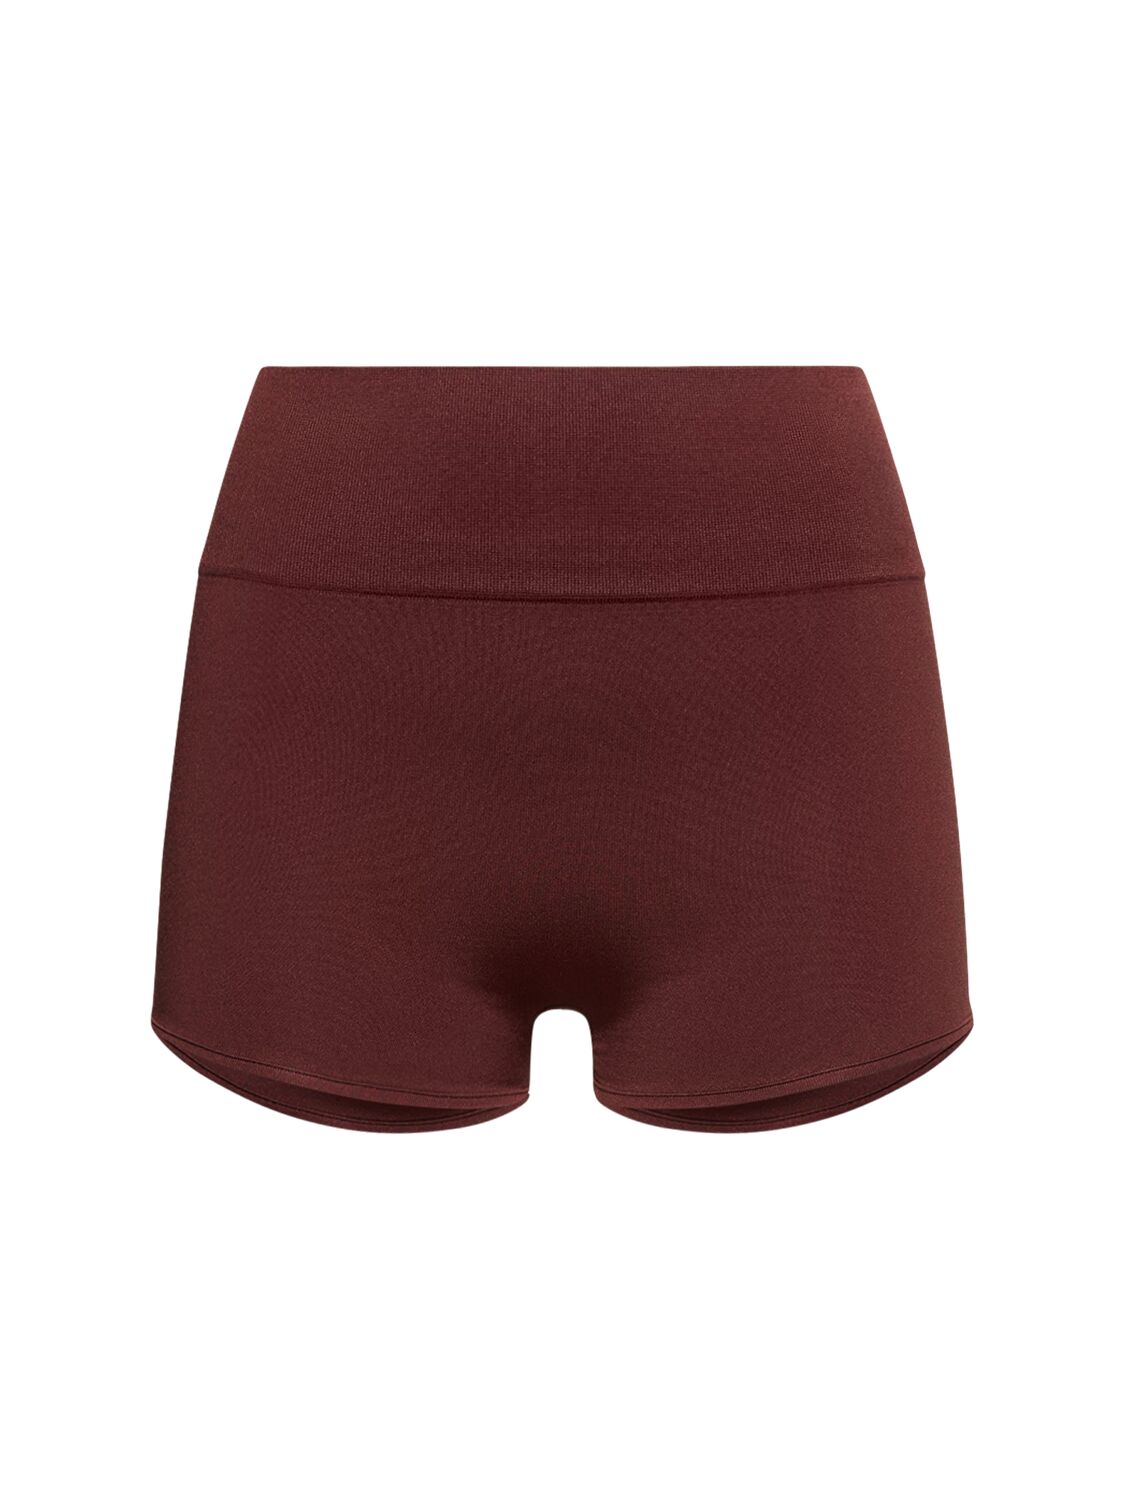 Prism Squared Renew High Waist Hot Pants In Brown